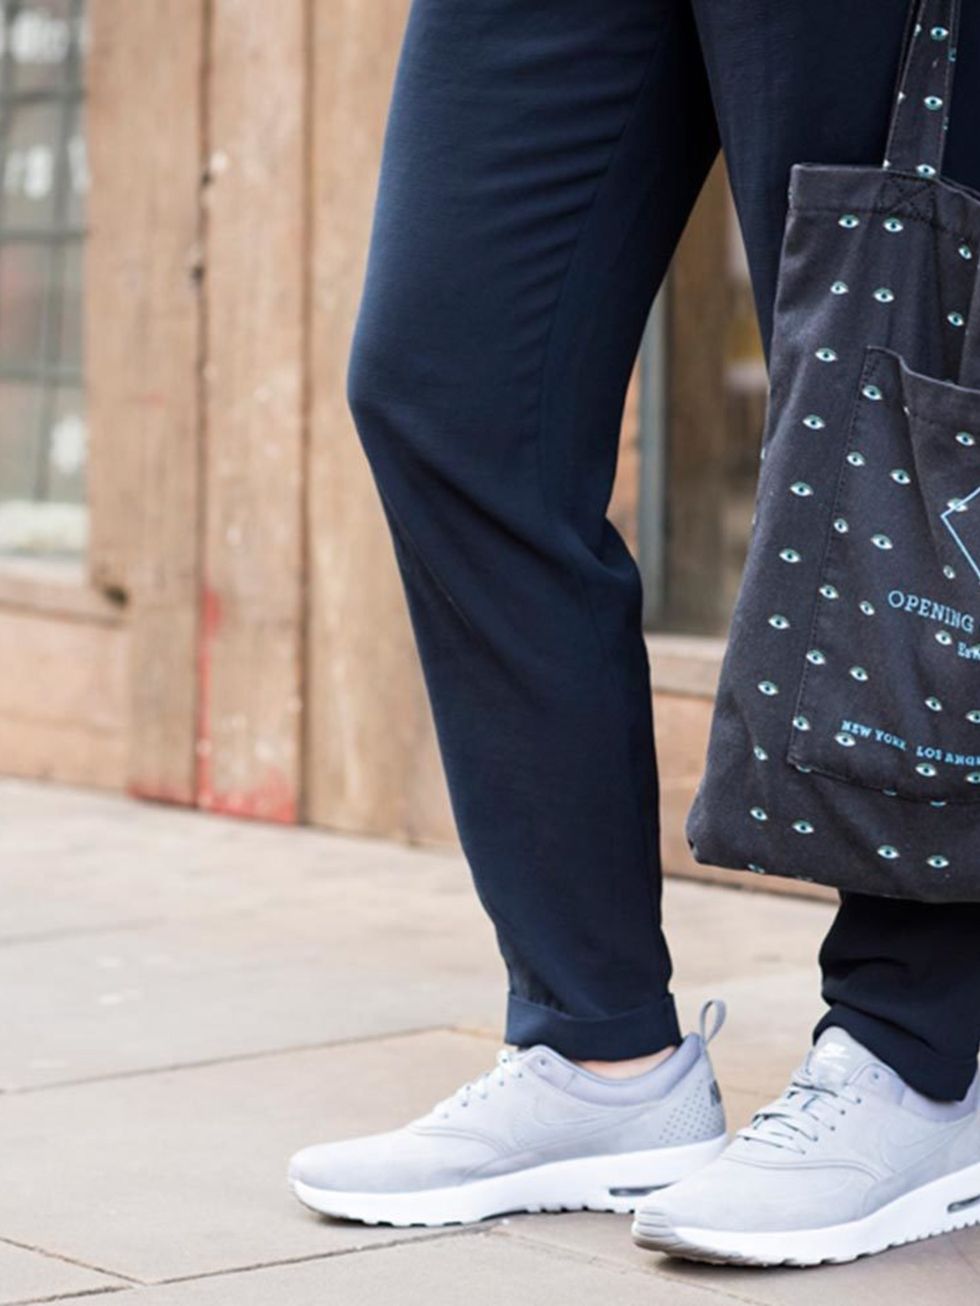 <p>Lotte Jeffs, Deputy Editor</p>

<p>Zara bomber jacker and trousers, Paul Smith shirt, Nike Air Max Thea trainers, Opening Ceremony bag</p>